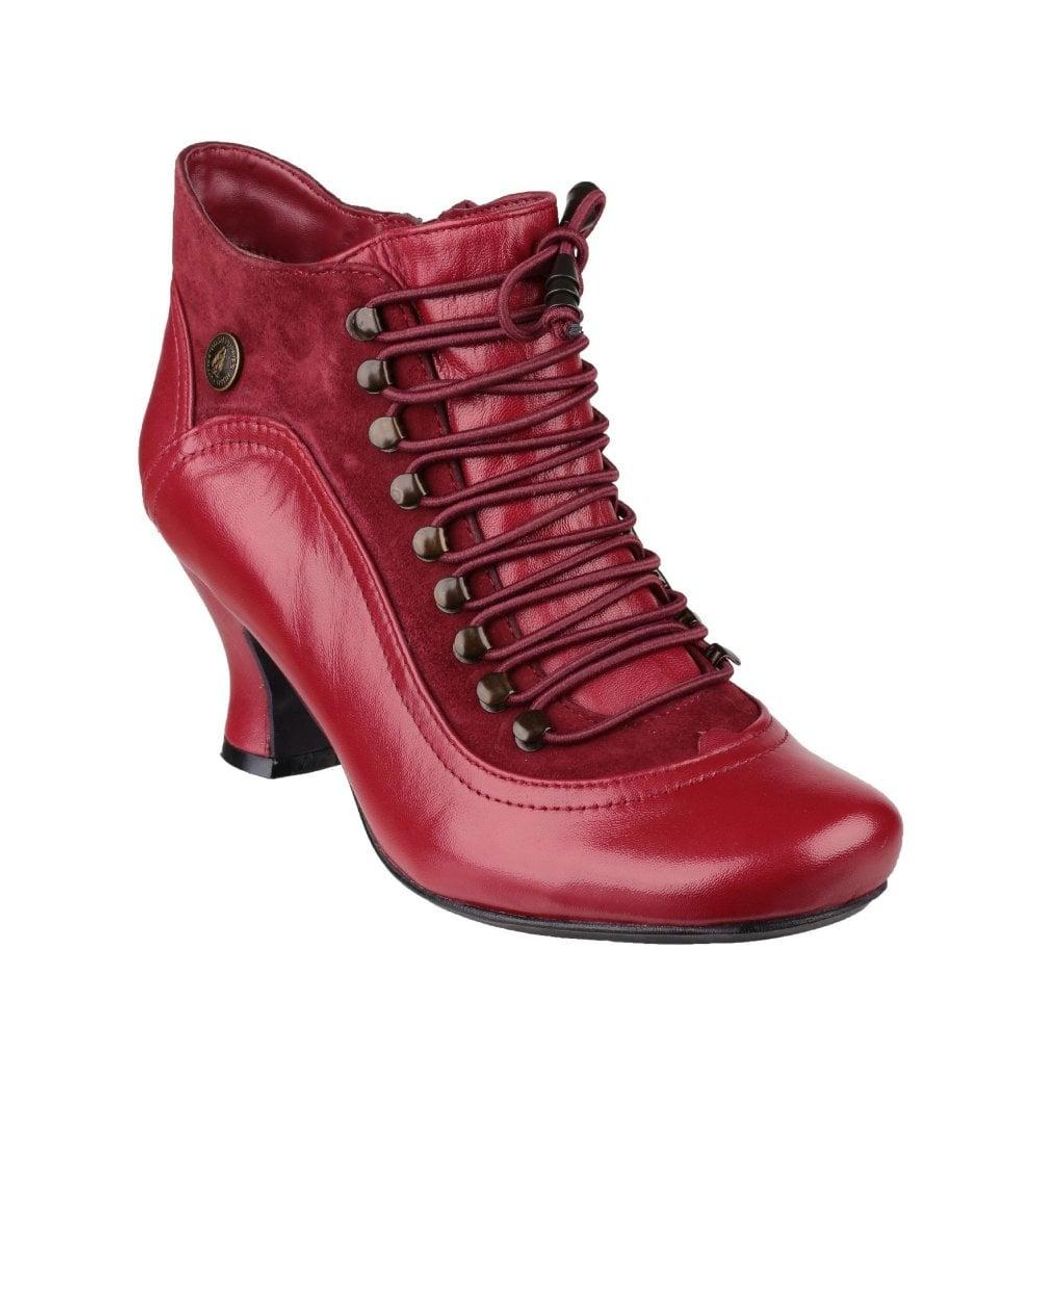 Hush Puppies Vivianna Lace Up Boots in Red | Lyst Canada